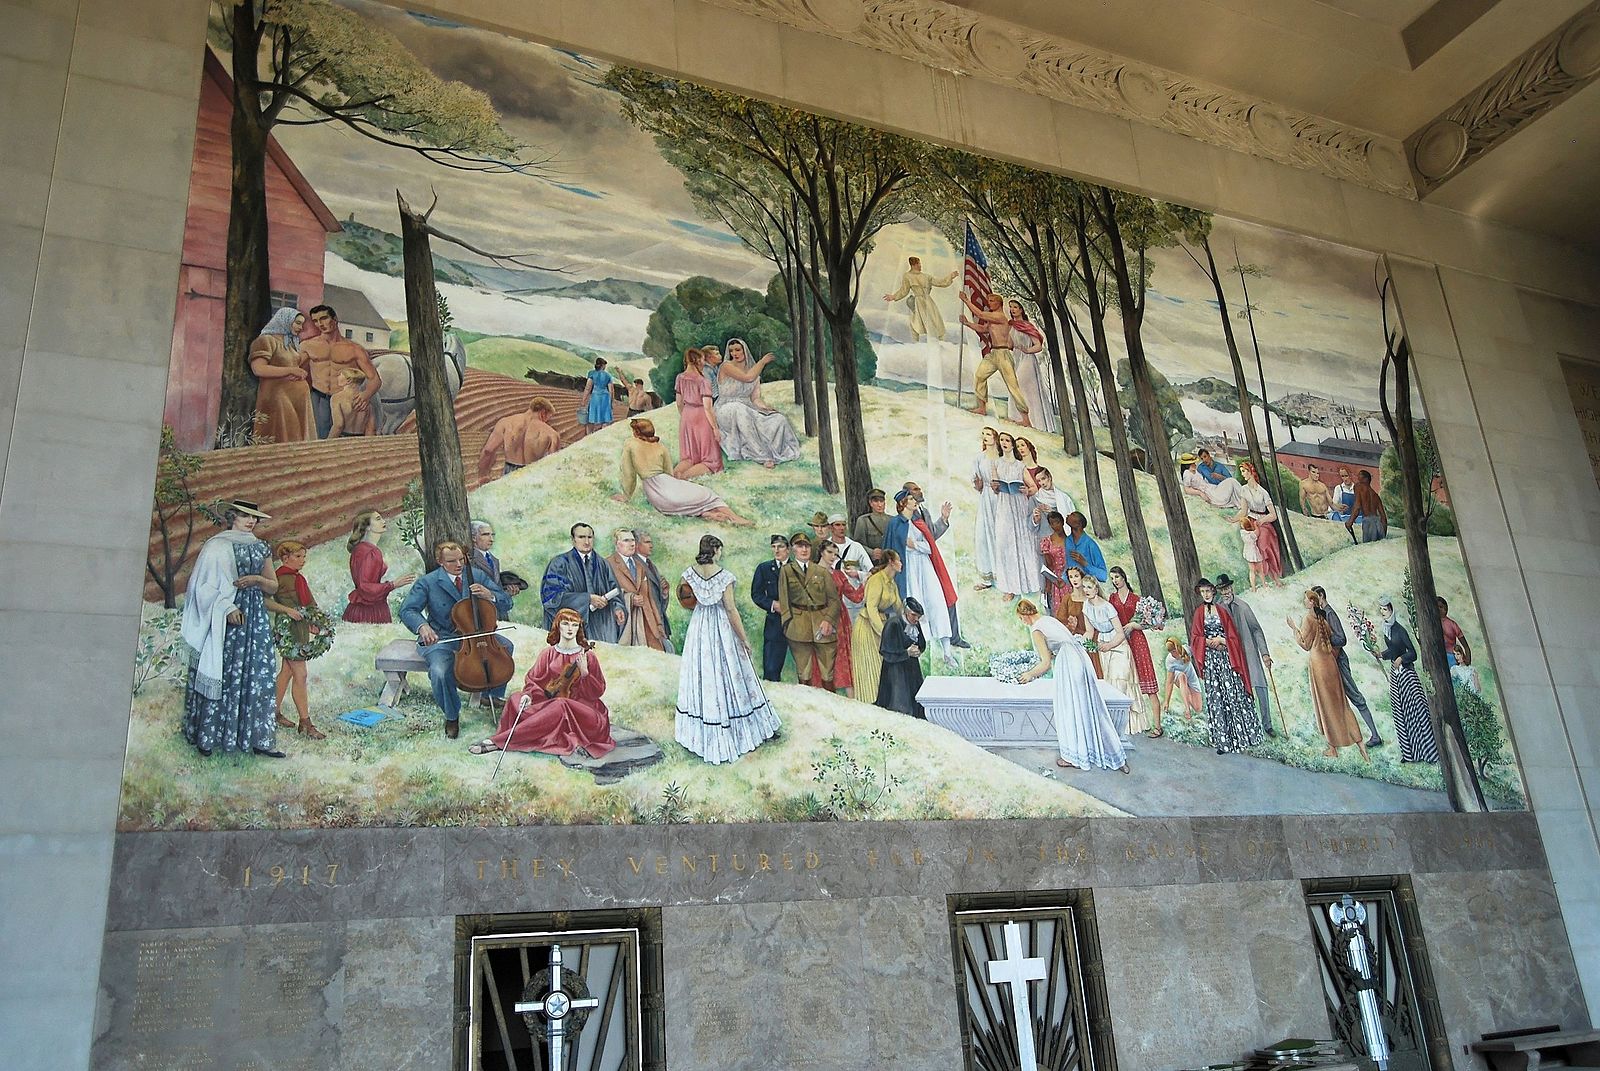 The Worcester Memorial Auditorium’s Main Mural (image courtesy of DBVW Architects)